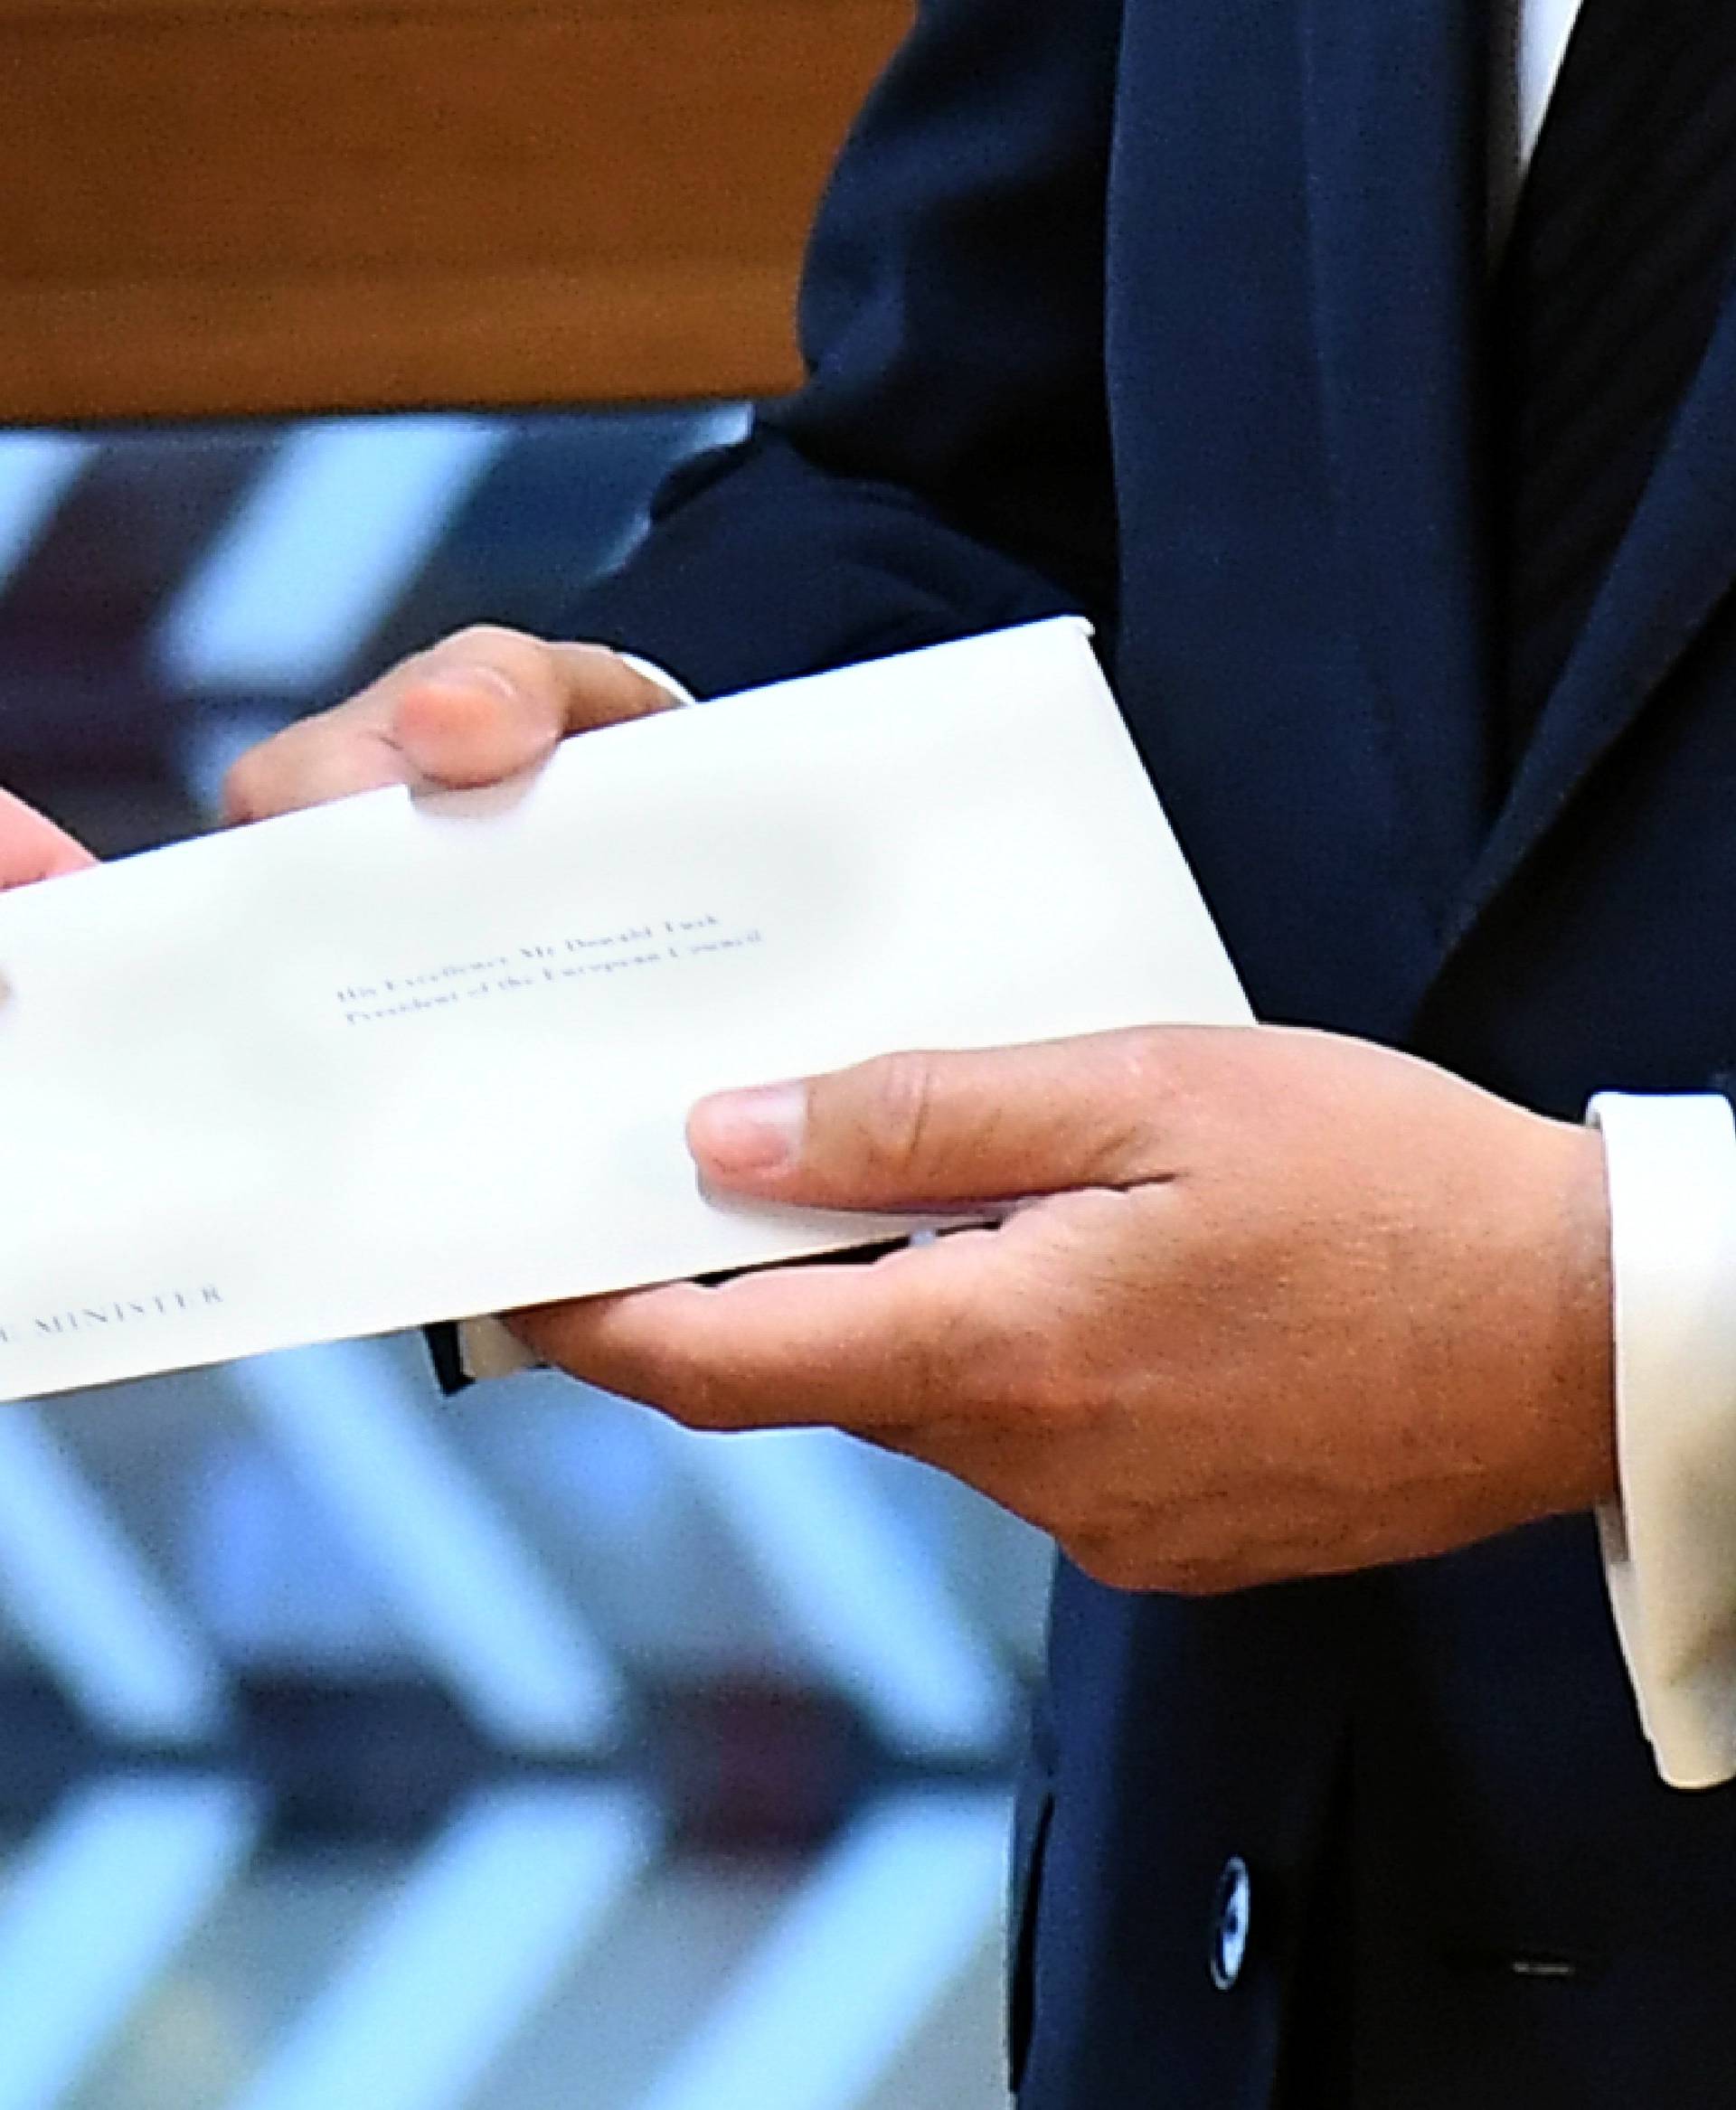 Britain's permanent representative to the European Union Tim Barrow delivers British Prime Minister Theresa May's Brexit letter to EU Council President Donald Tusk in Brussels